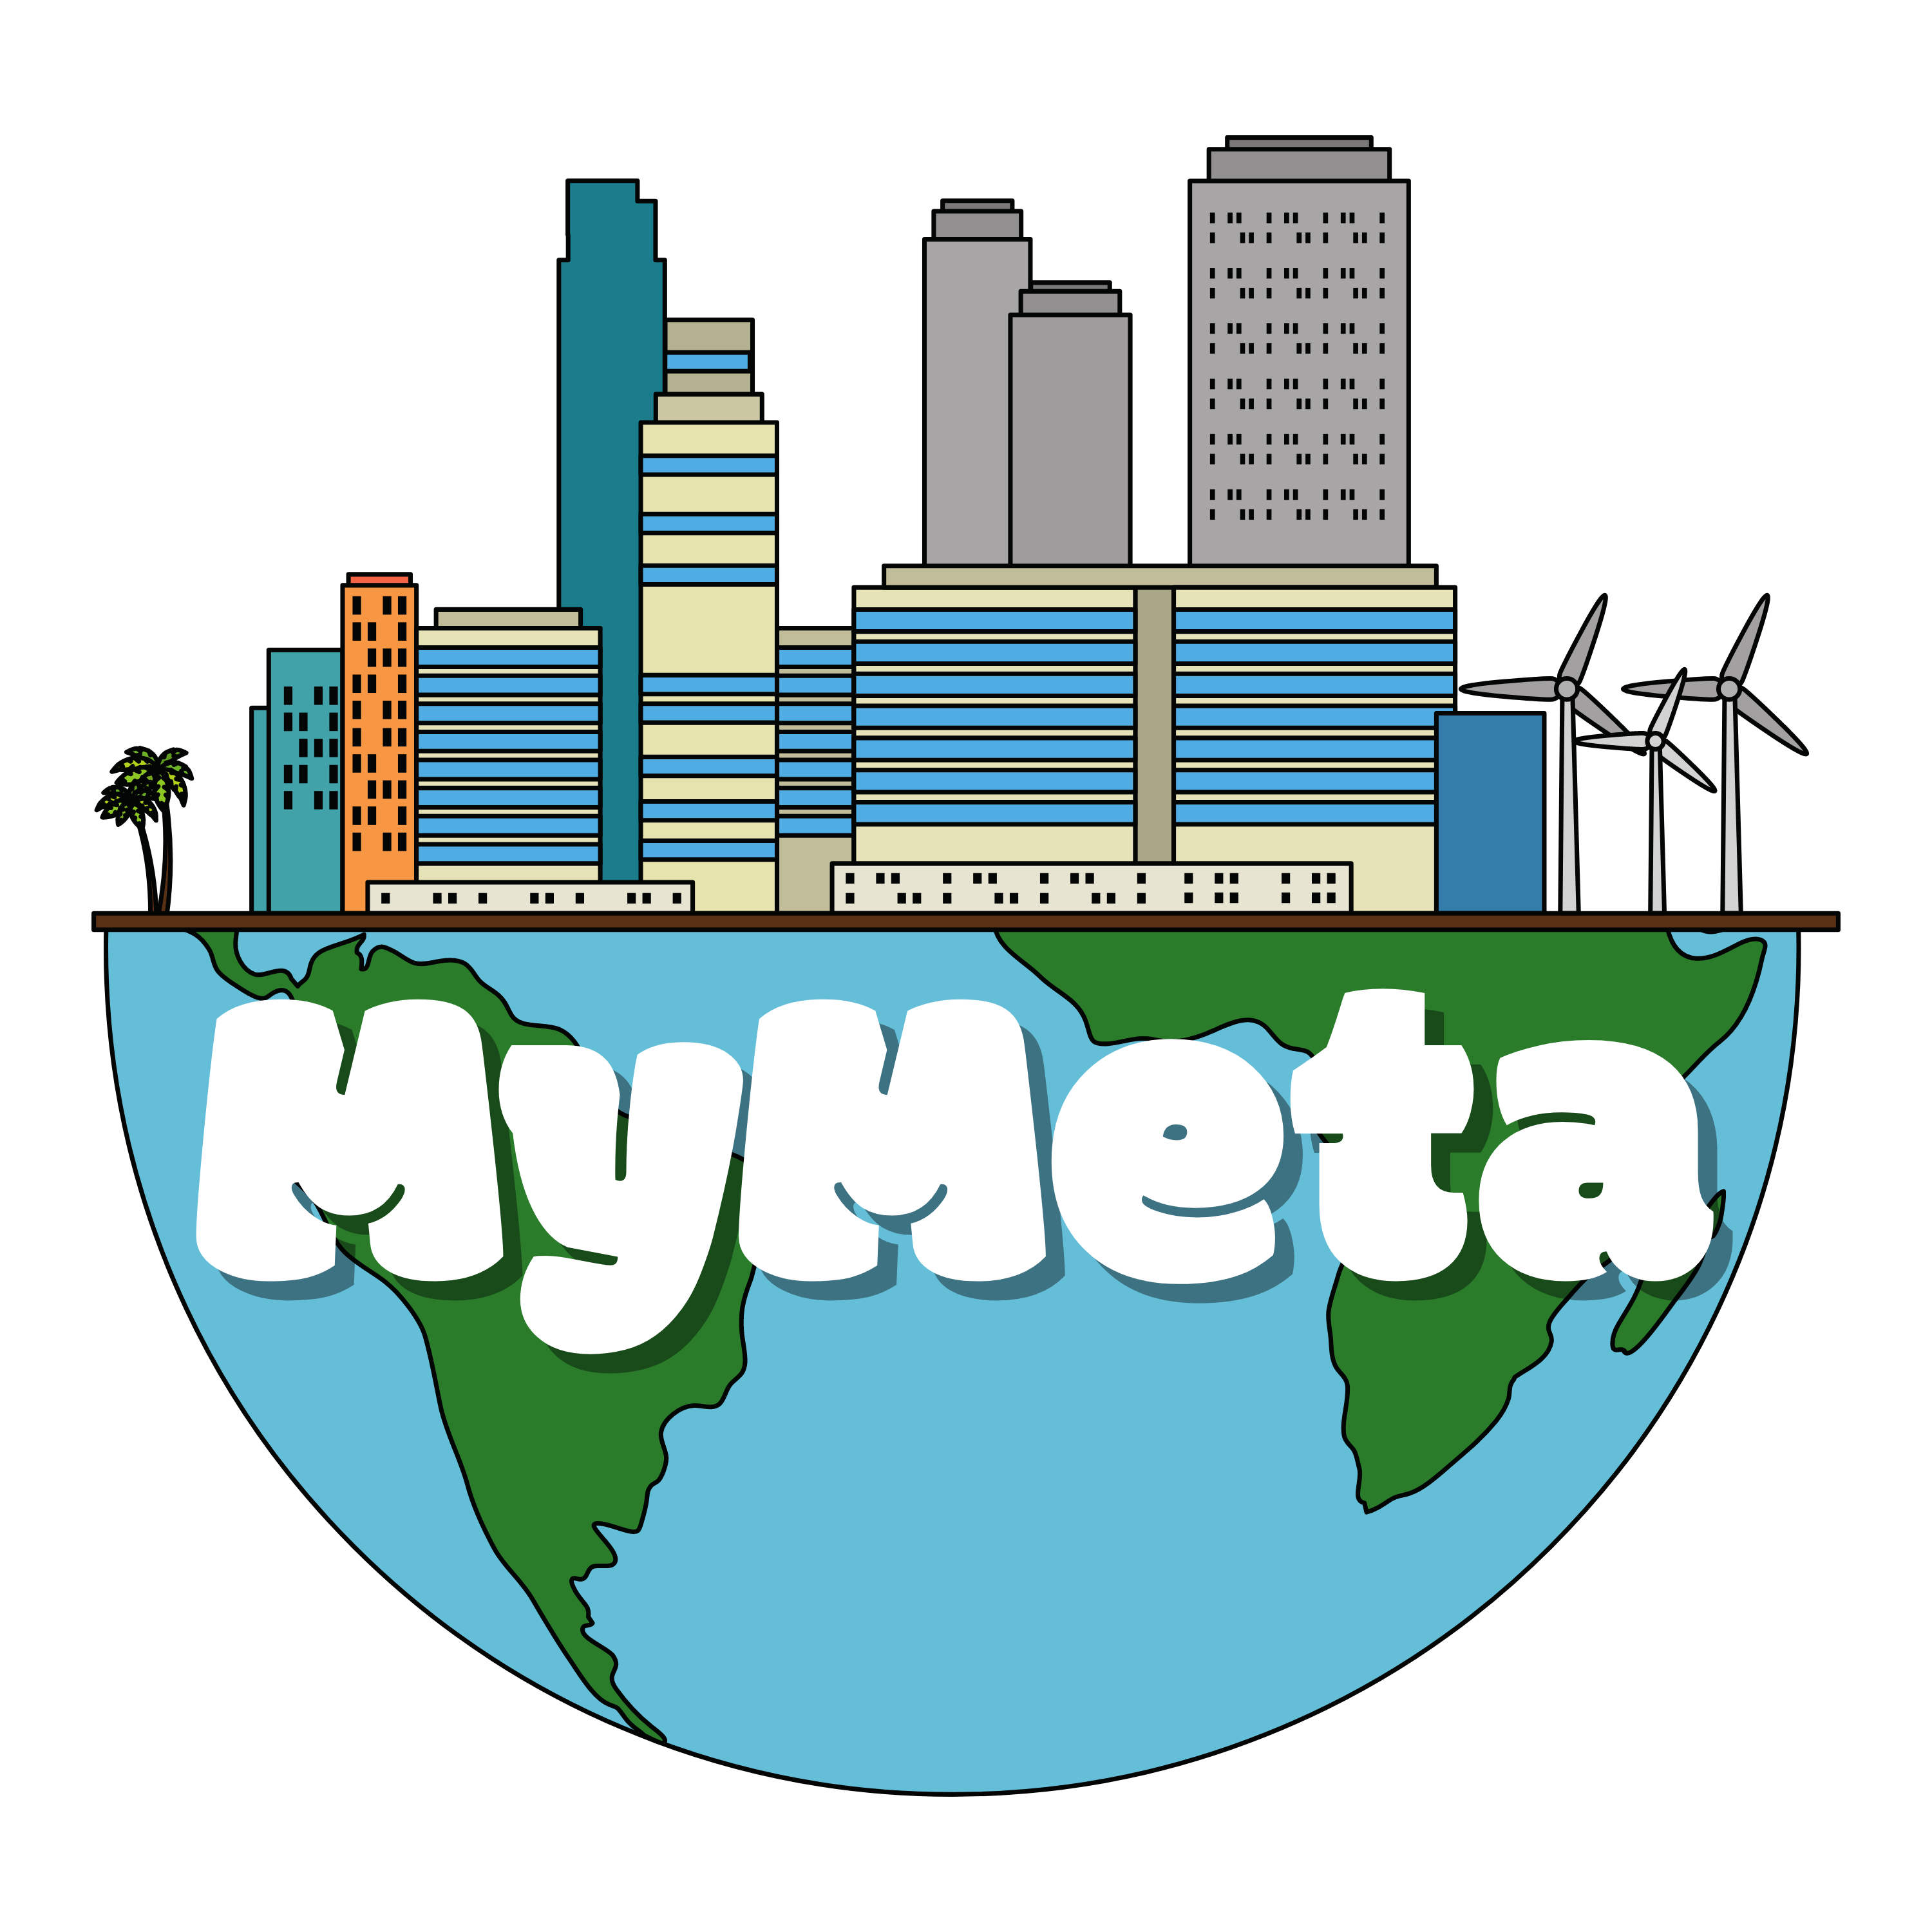 Earn Real Money by Selling Metaverse Property and Becoming an Entrepreneur in MyMeta.